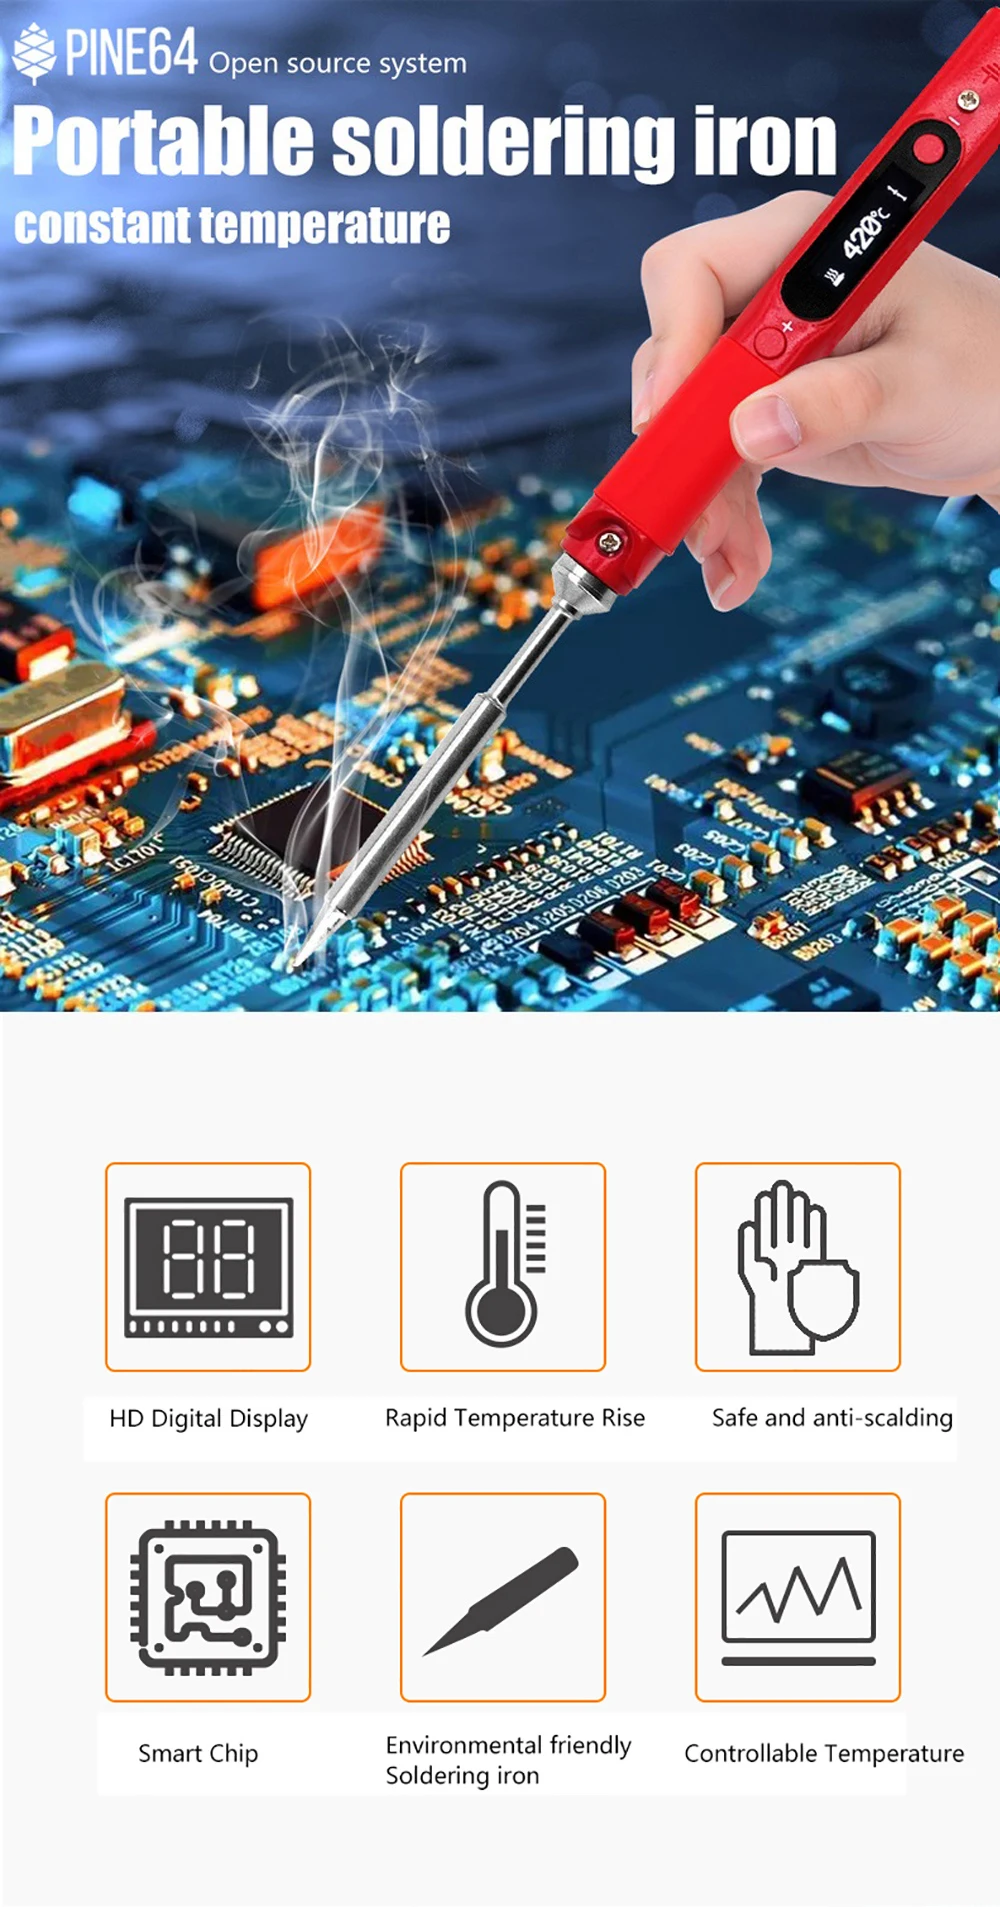 Pine64 Pinecil-BB2 Smart Mini Soldering Iron Portable TYPE-C Jack For Welding Tools Constant Temperature Intelligent Maintenance electric solder